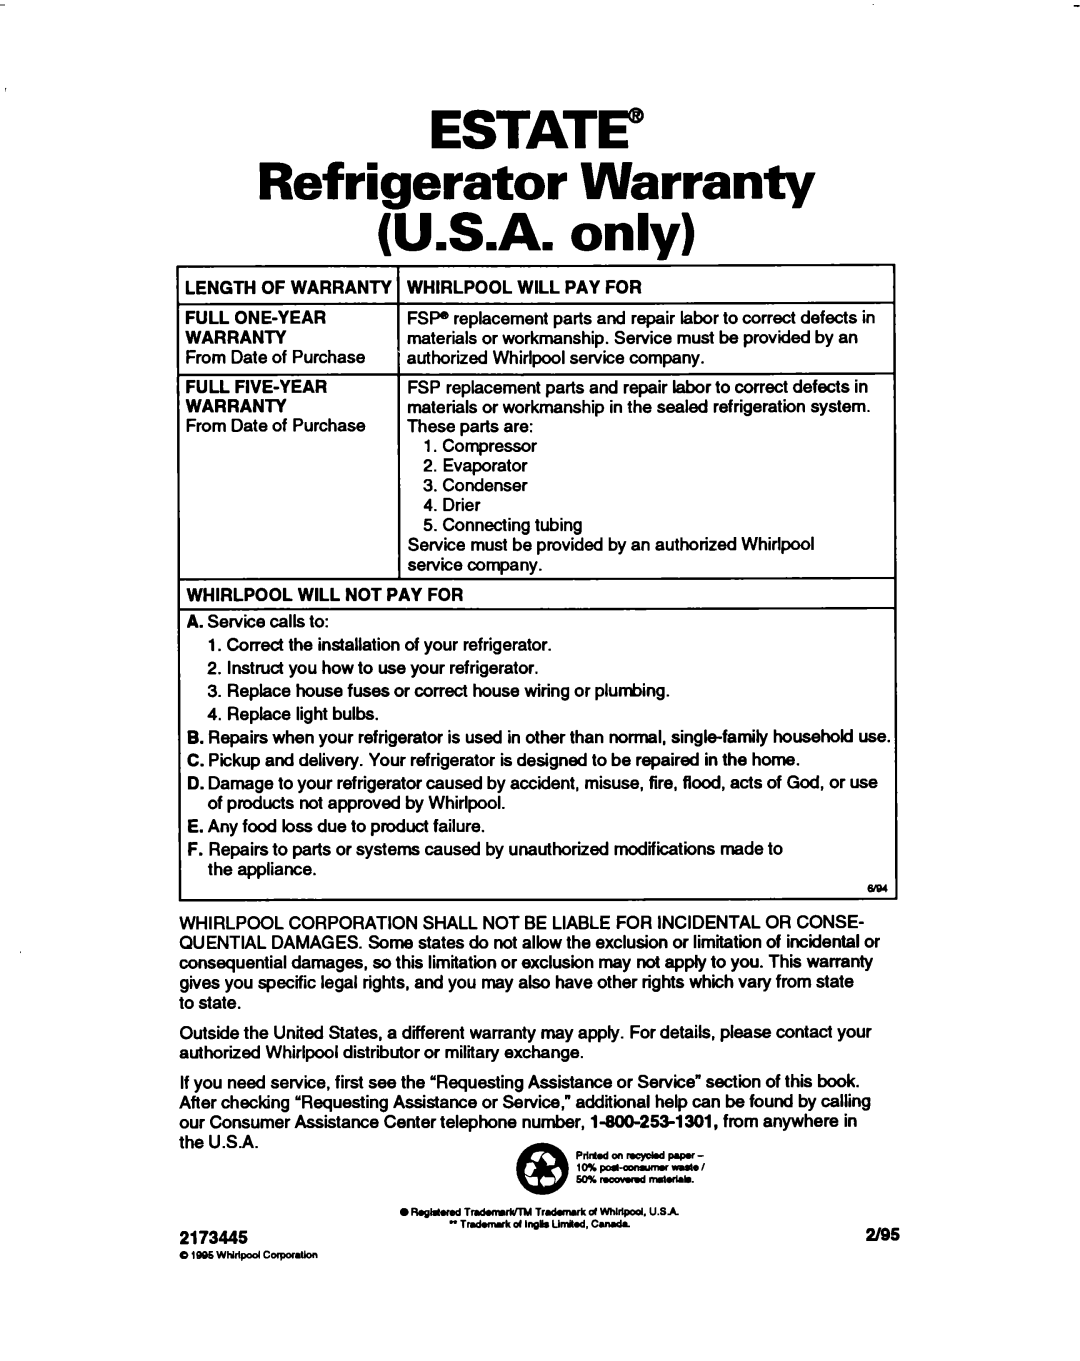 Estate 2173445 ESTATE” Refrigerator Warranty U.S.A. only, Length Of Warranty, Whirlpool Will Pay For, leeswhlflpodcupordbn 